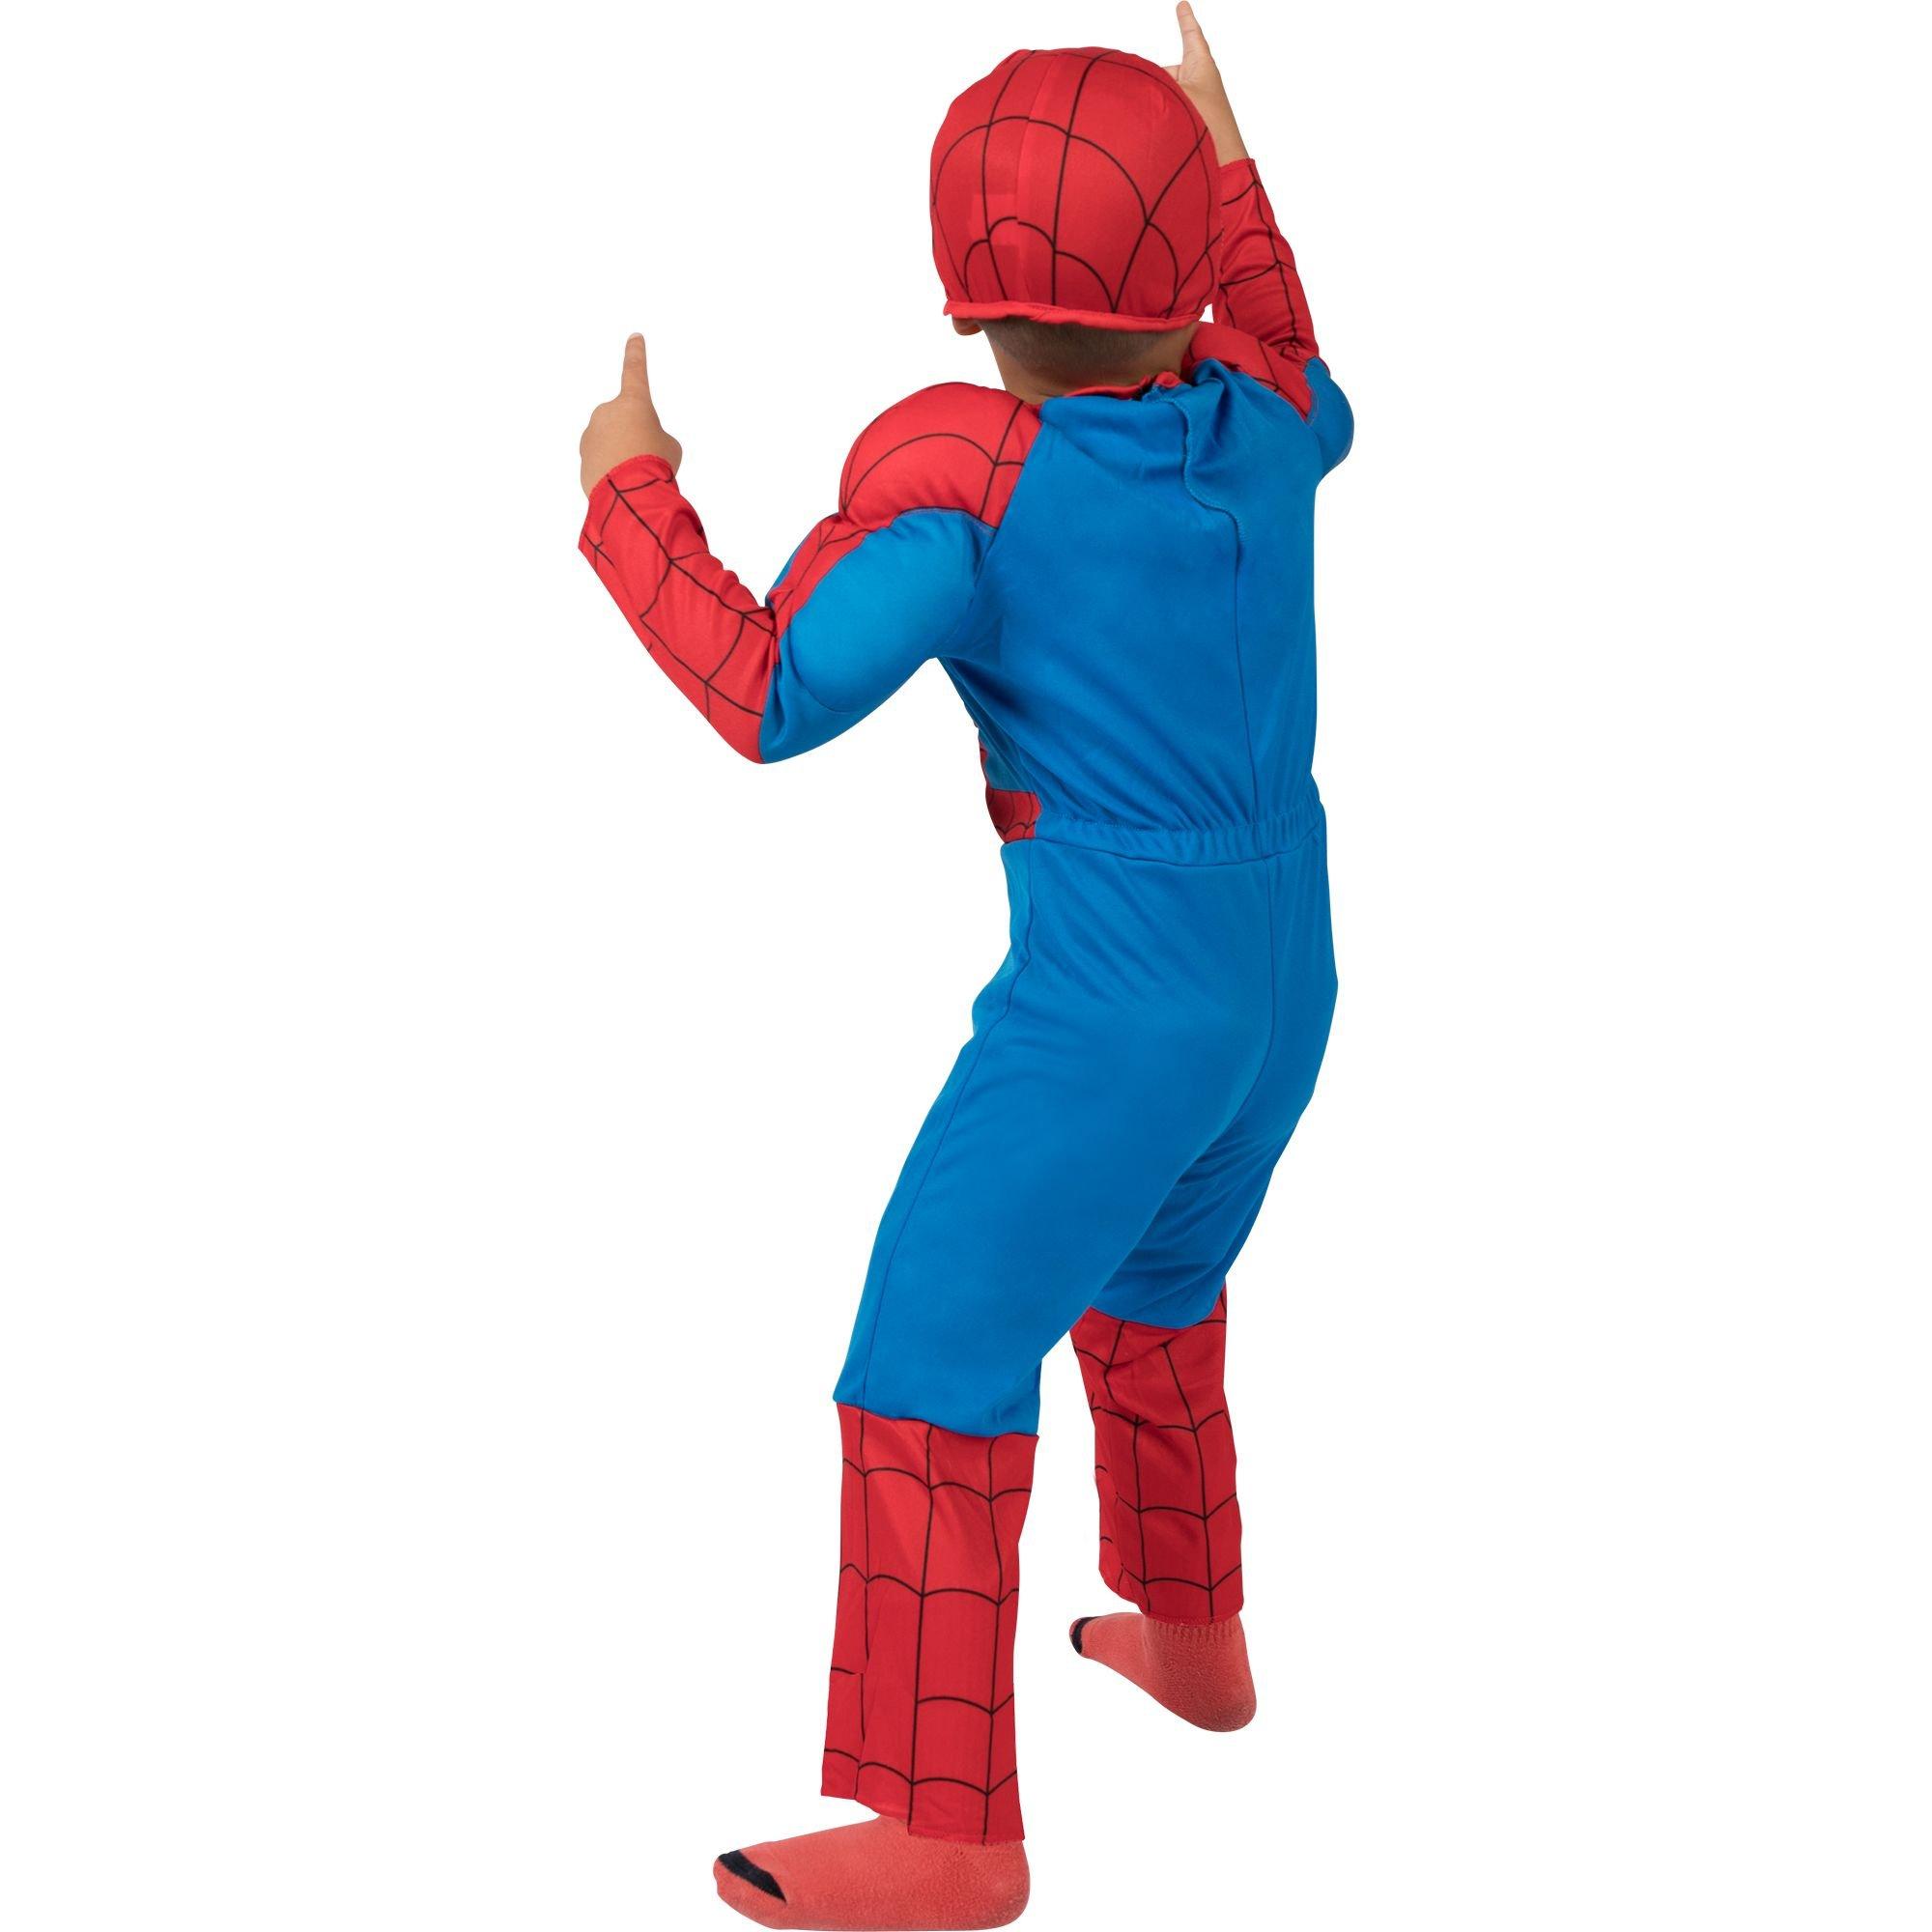 Spiderman Costume Boys kids light up Spider Size T FREE MASK T (2-3)